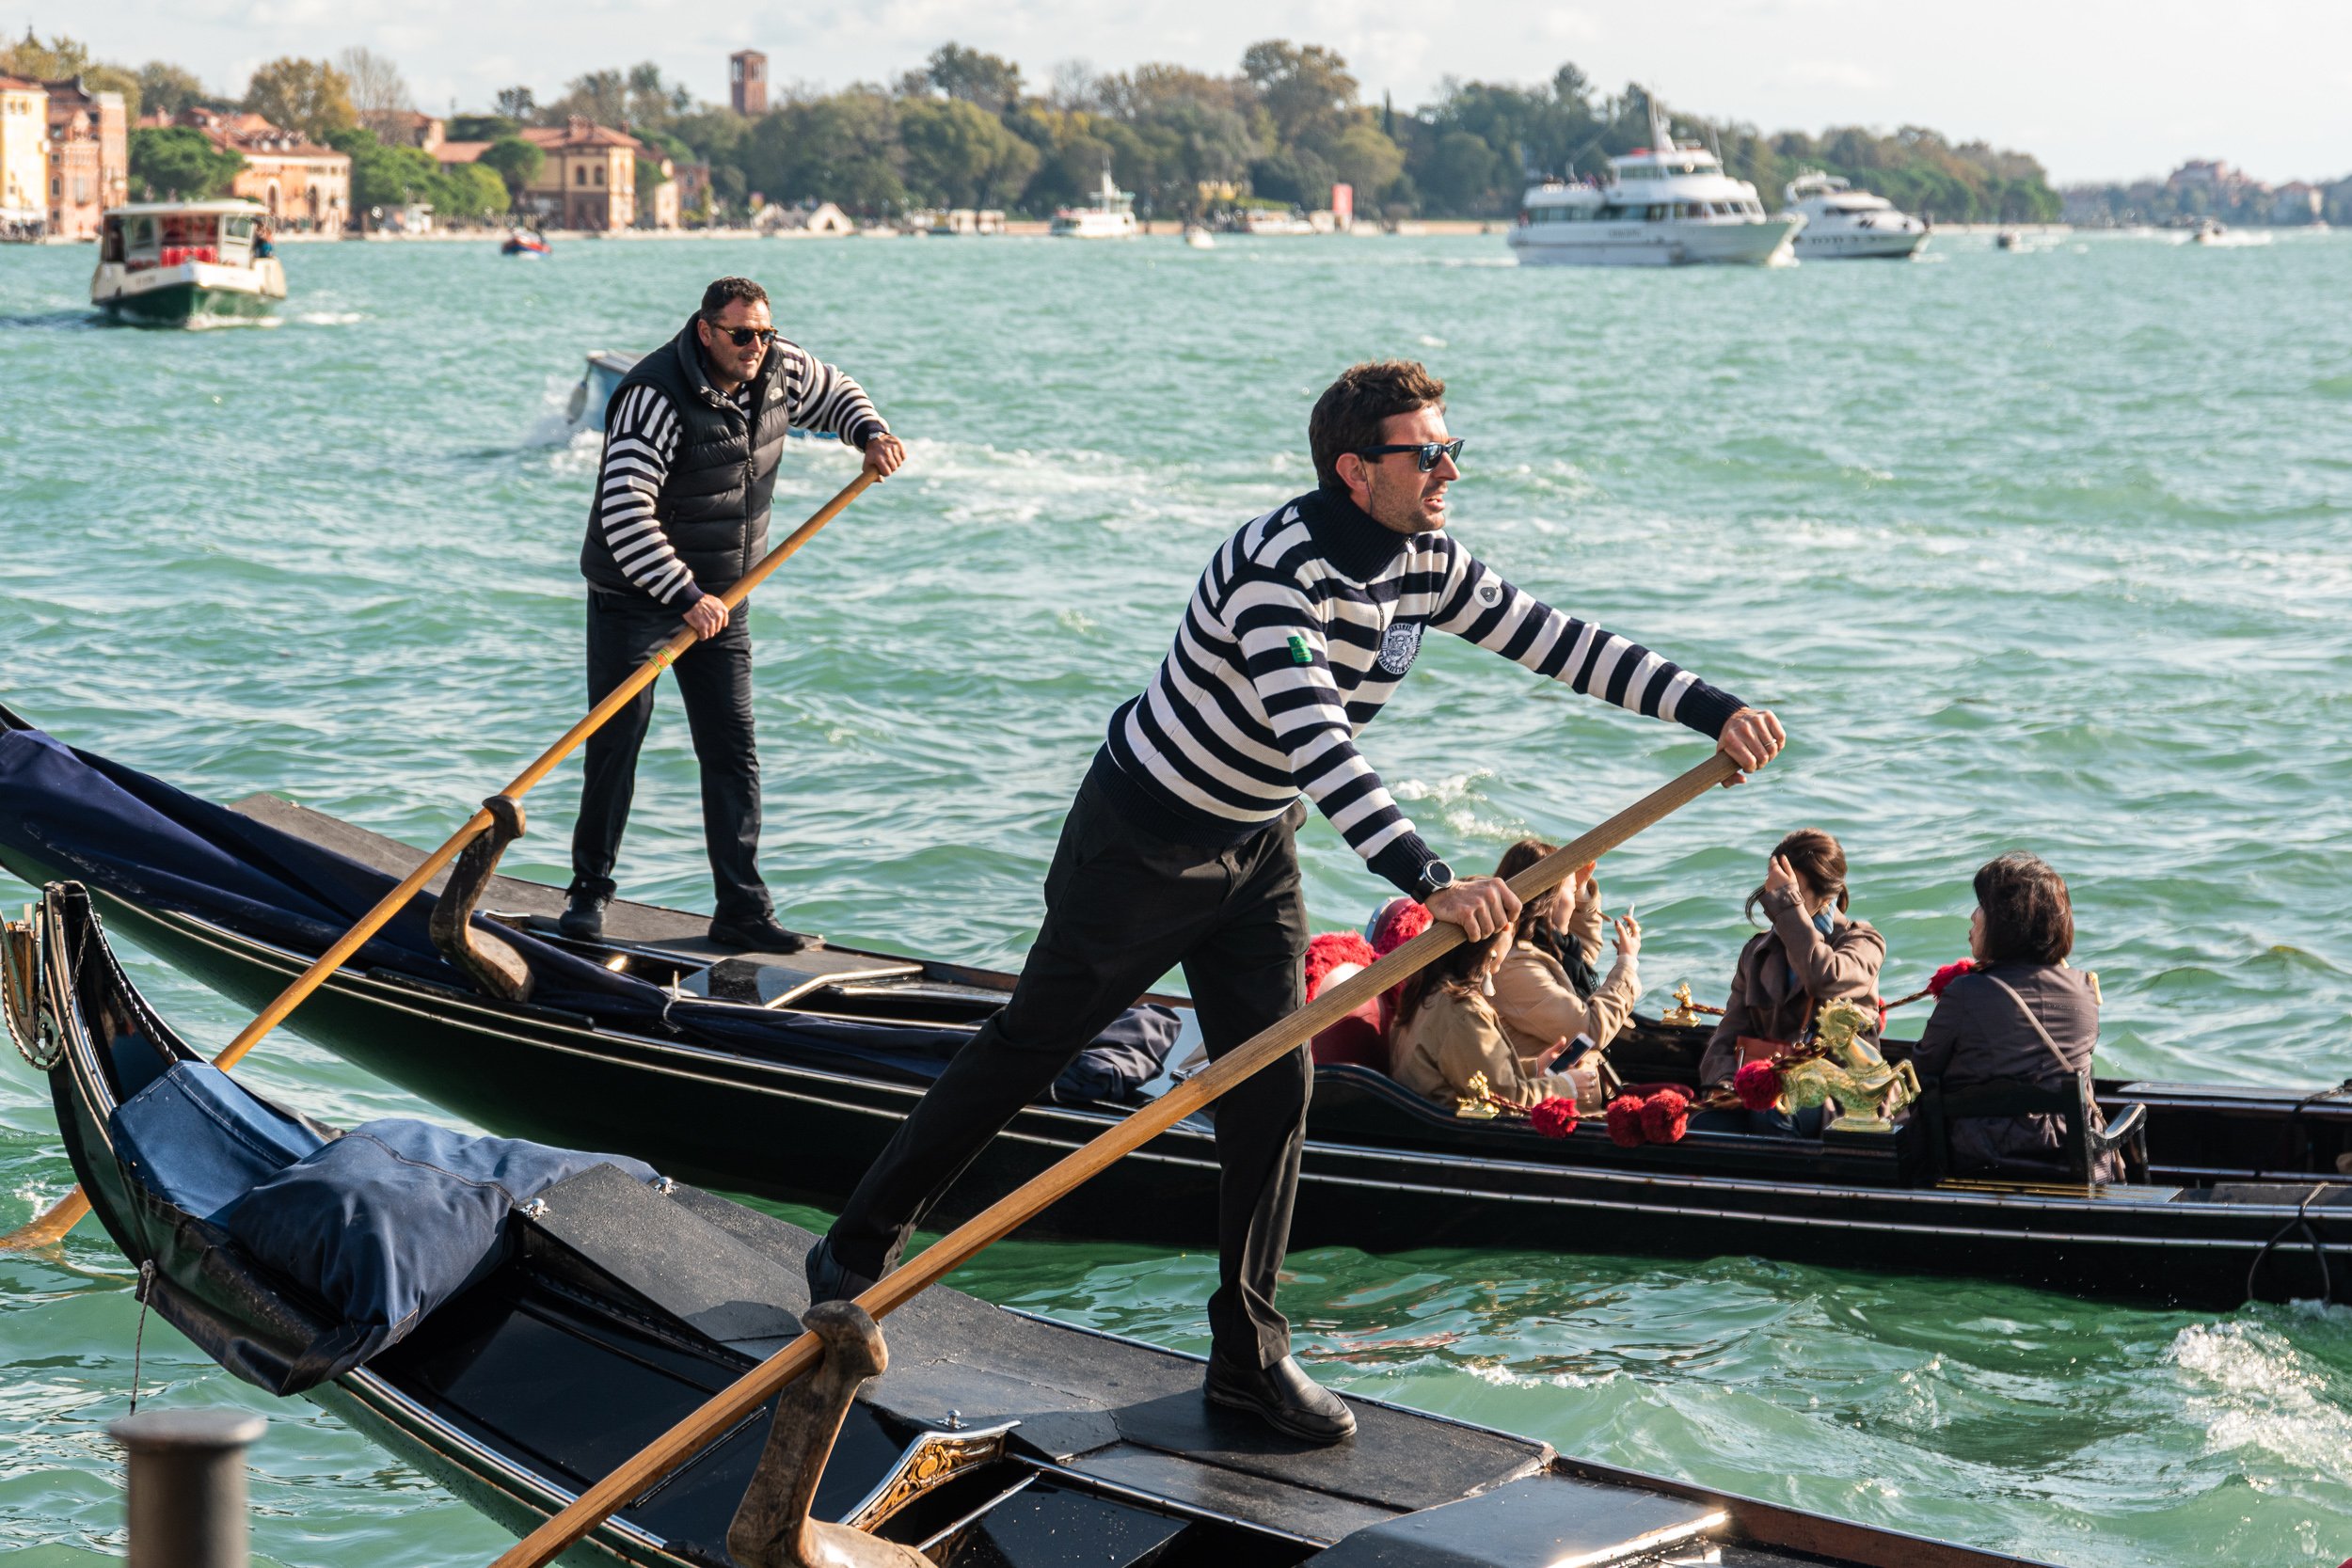 venice visitor tax - Crowded Gondolas In The Canal